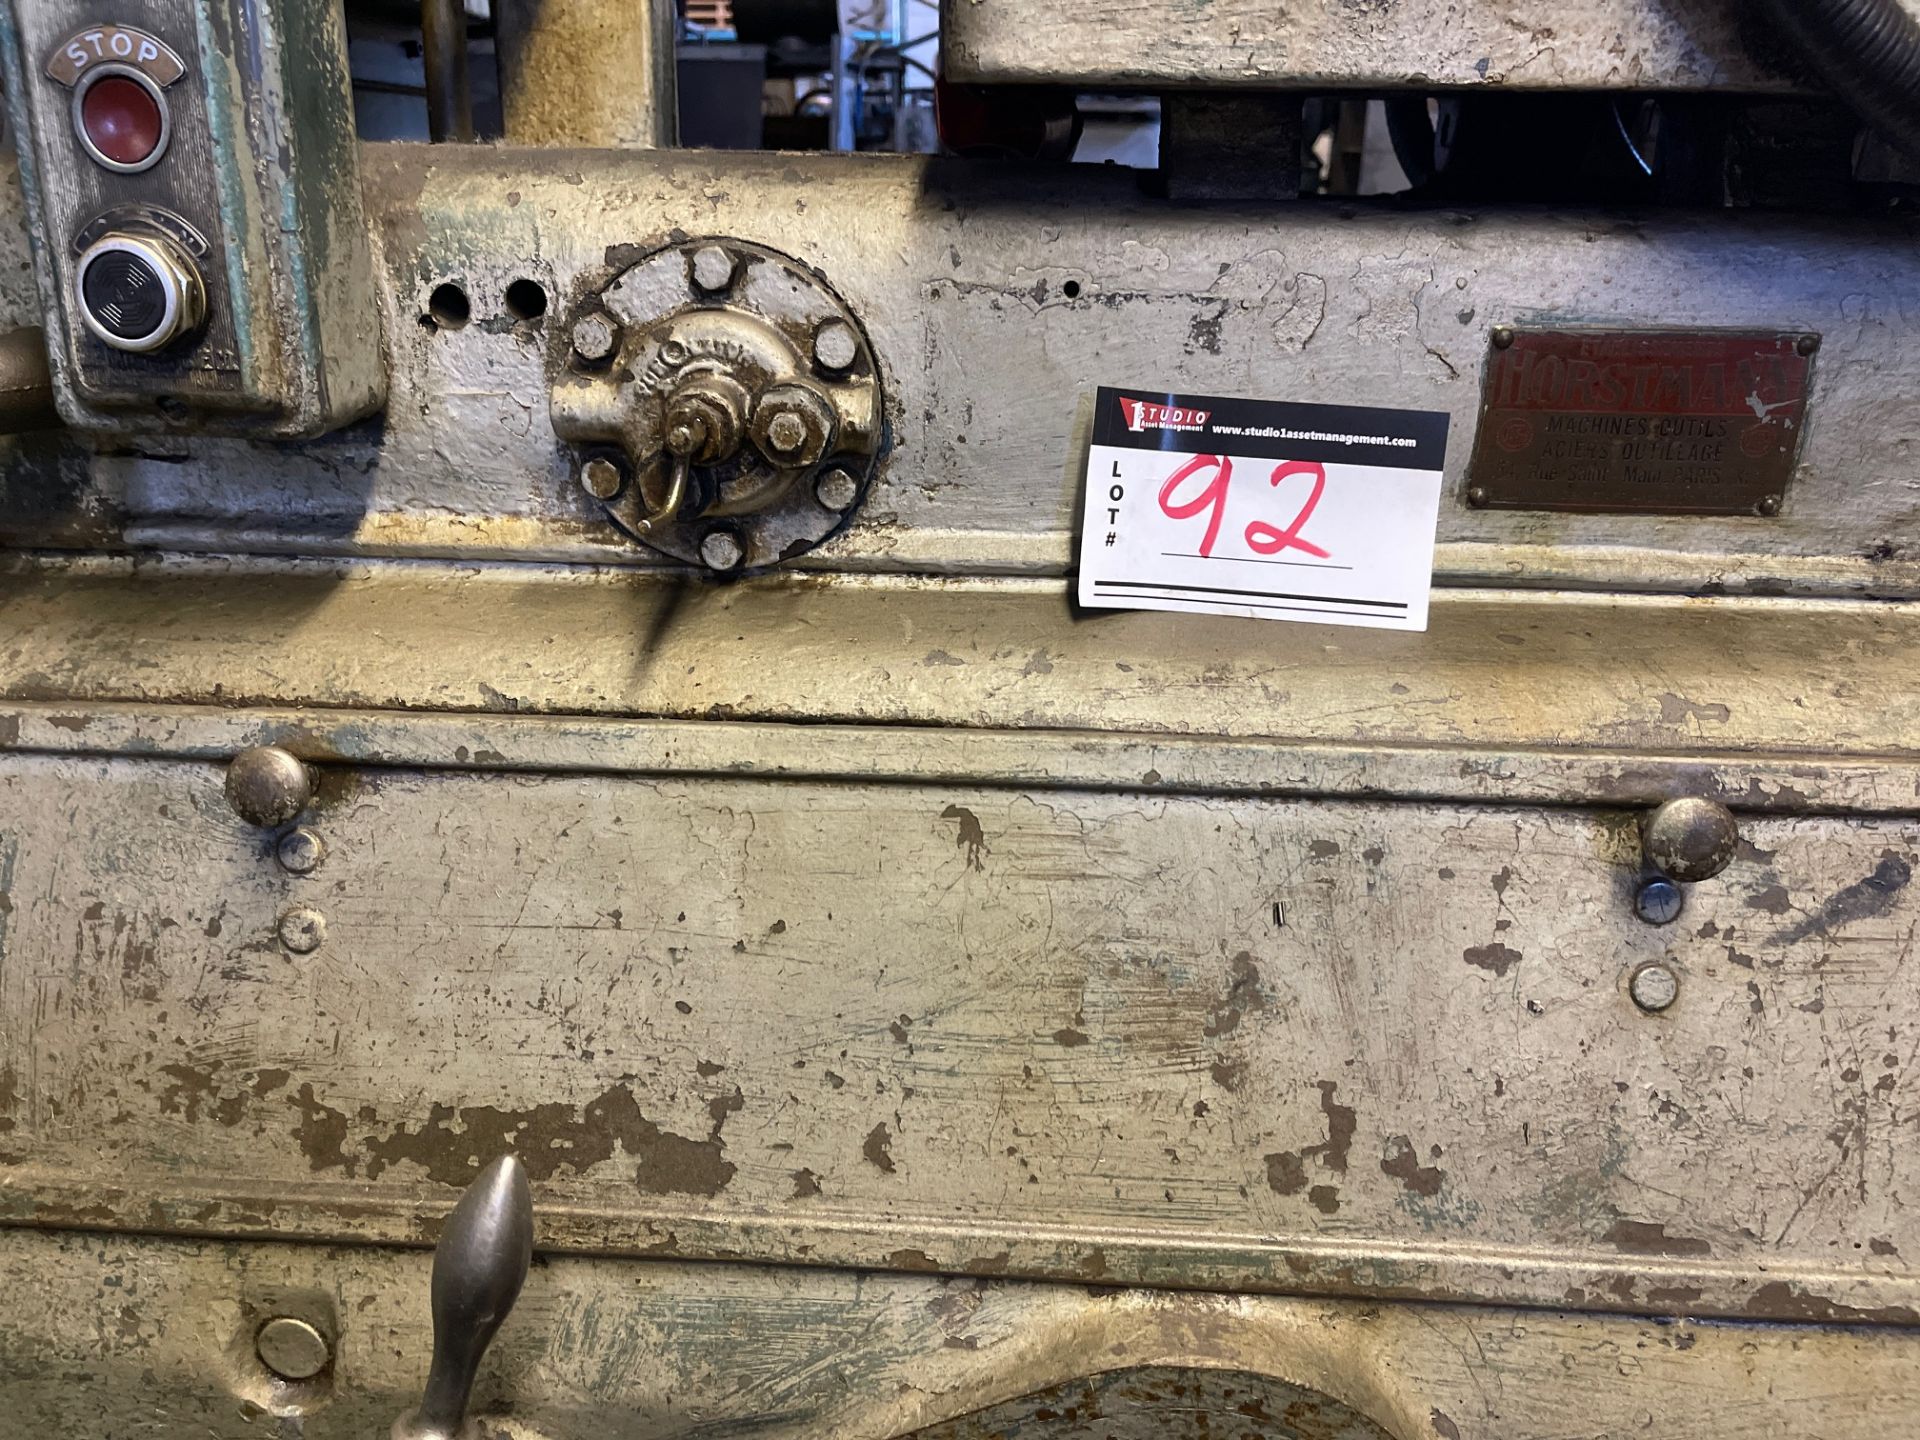 ACME # 002, THE NATIONAL ACME CO, SIZE 9/16, SERIAL 22285 -CM, RIGGING $400 - Image 11 of 14